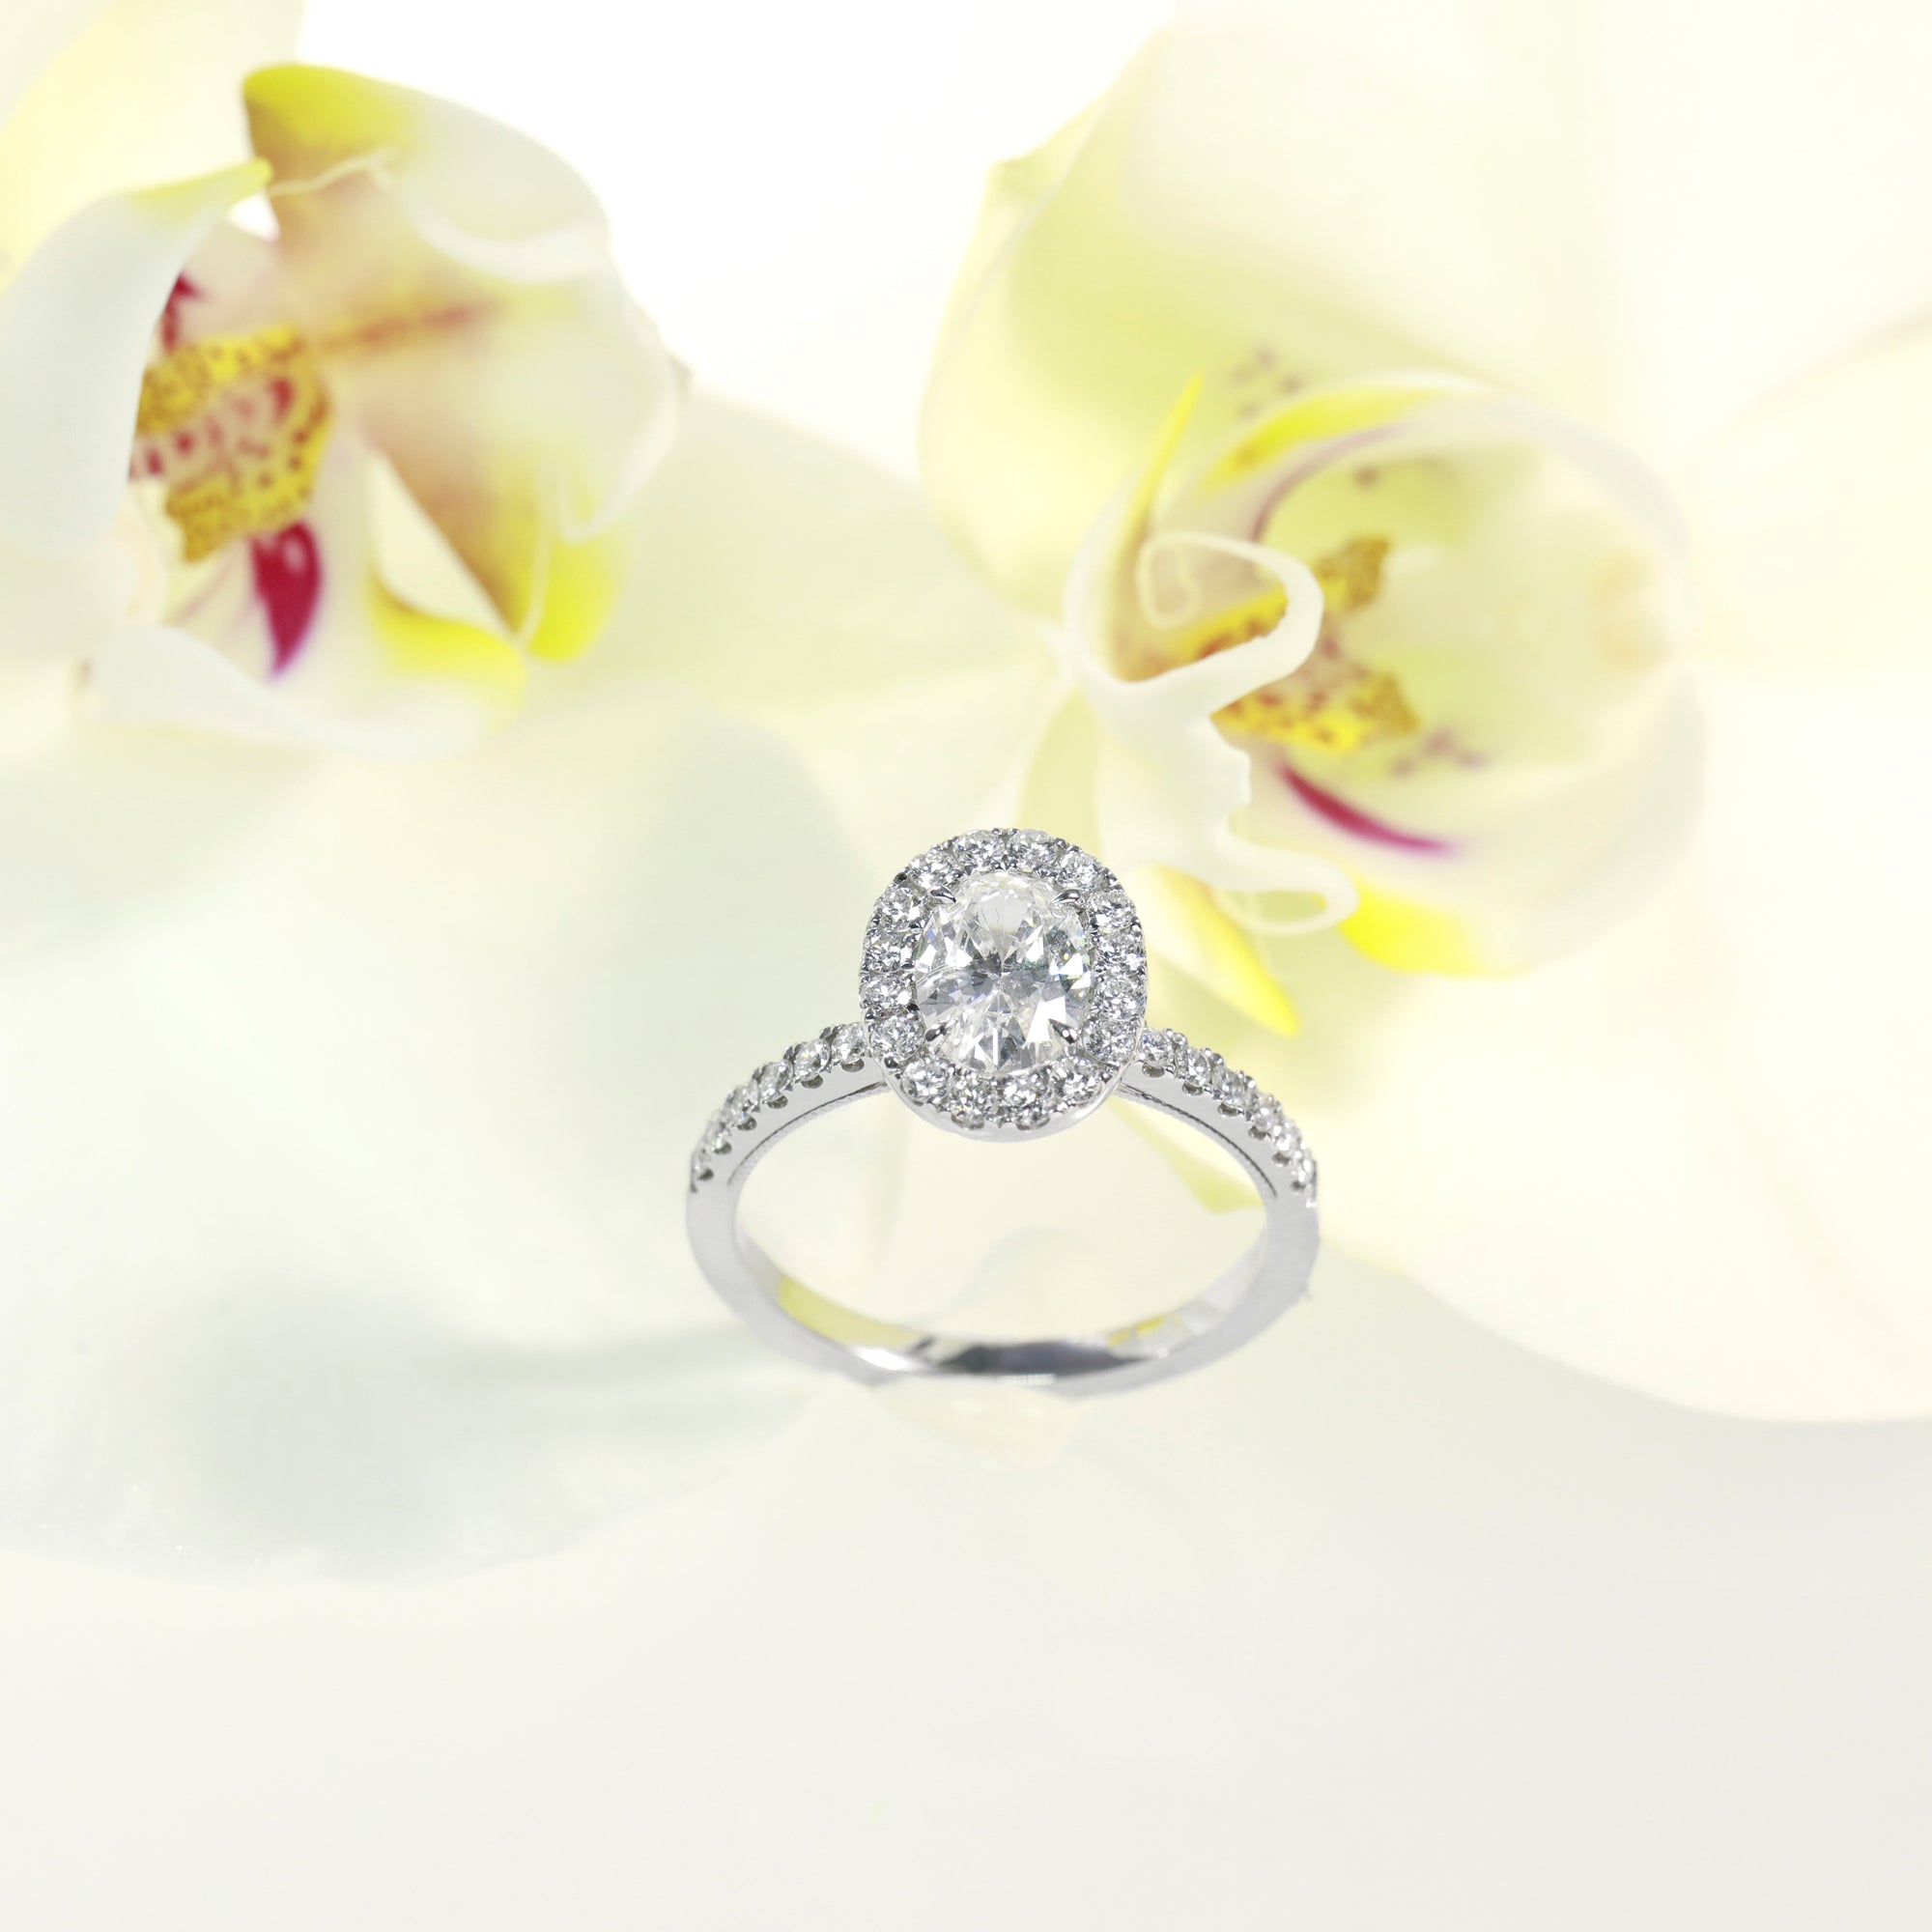 14k white gold diamond engagement ring featuring a 0.84 carat oval diamond center and round brilliant diamond halo and side stones weighing a total of 0.45 carats. Total diamond weight: 1.29ct